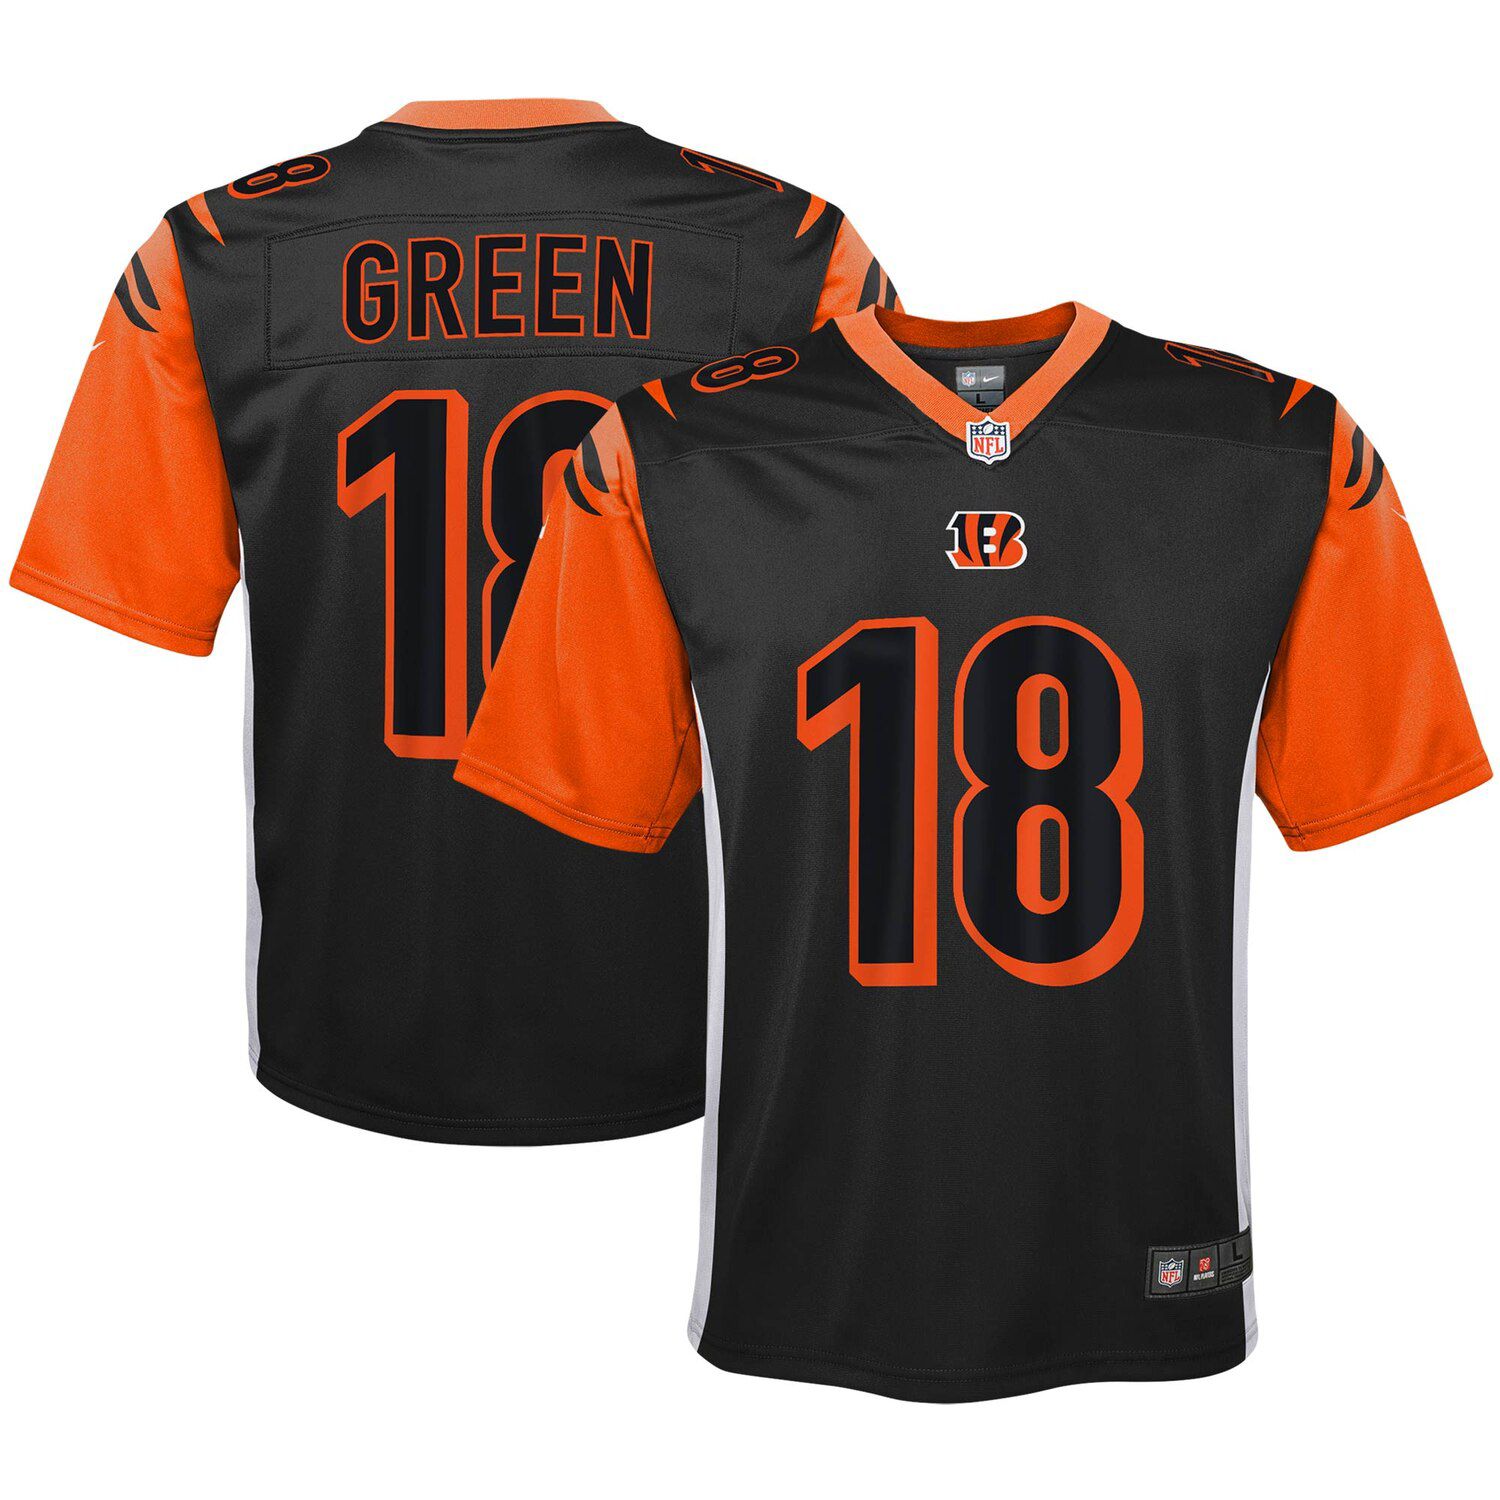 aj green jersey youth large